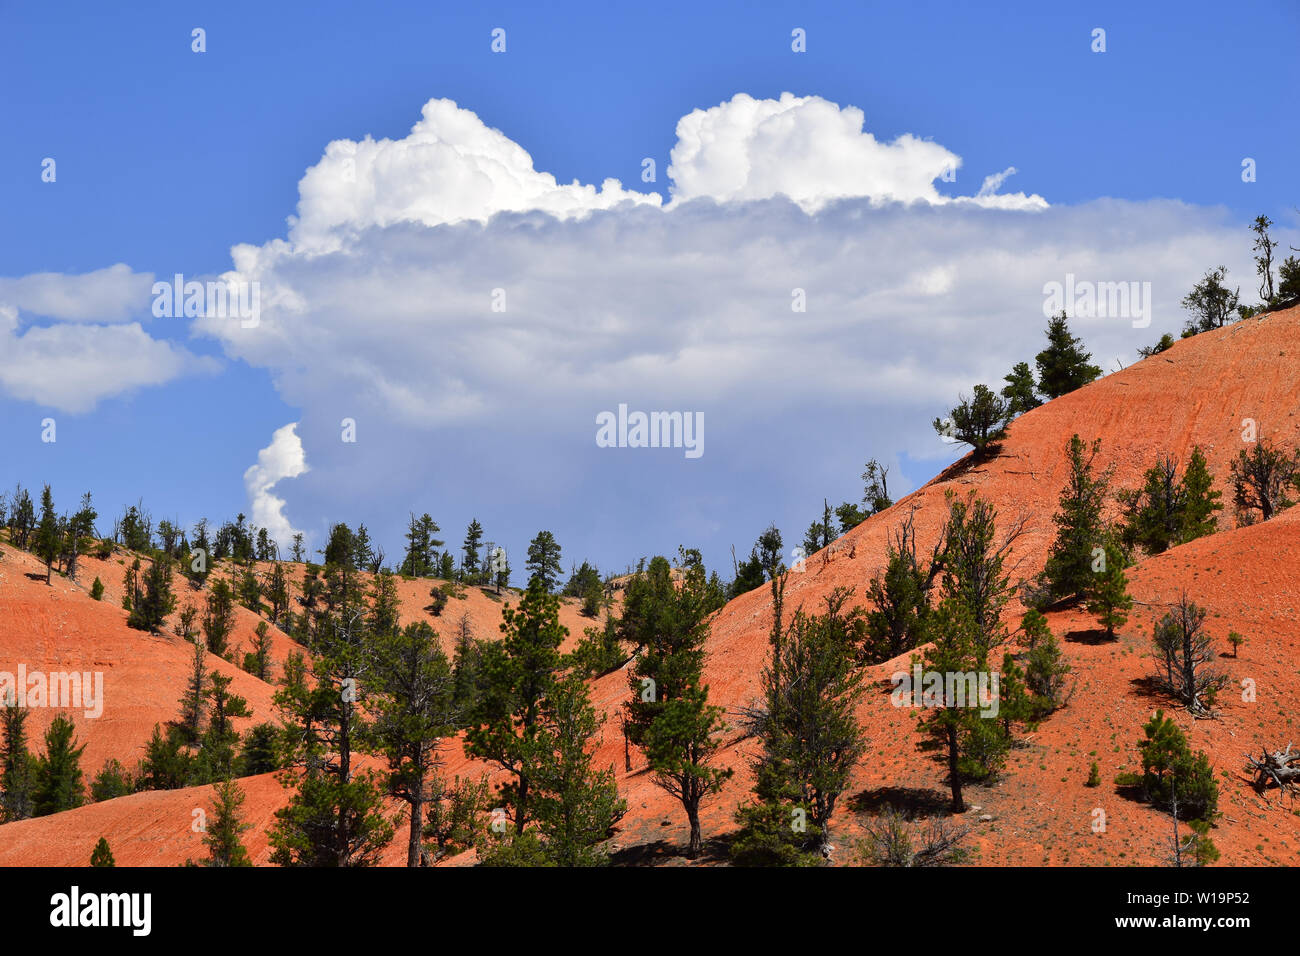 Rock formations in Southwestern Utah, USA Stock Photo